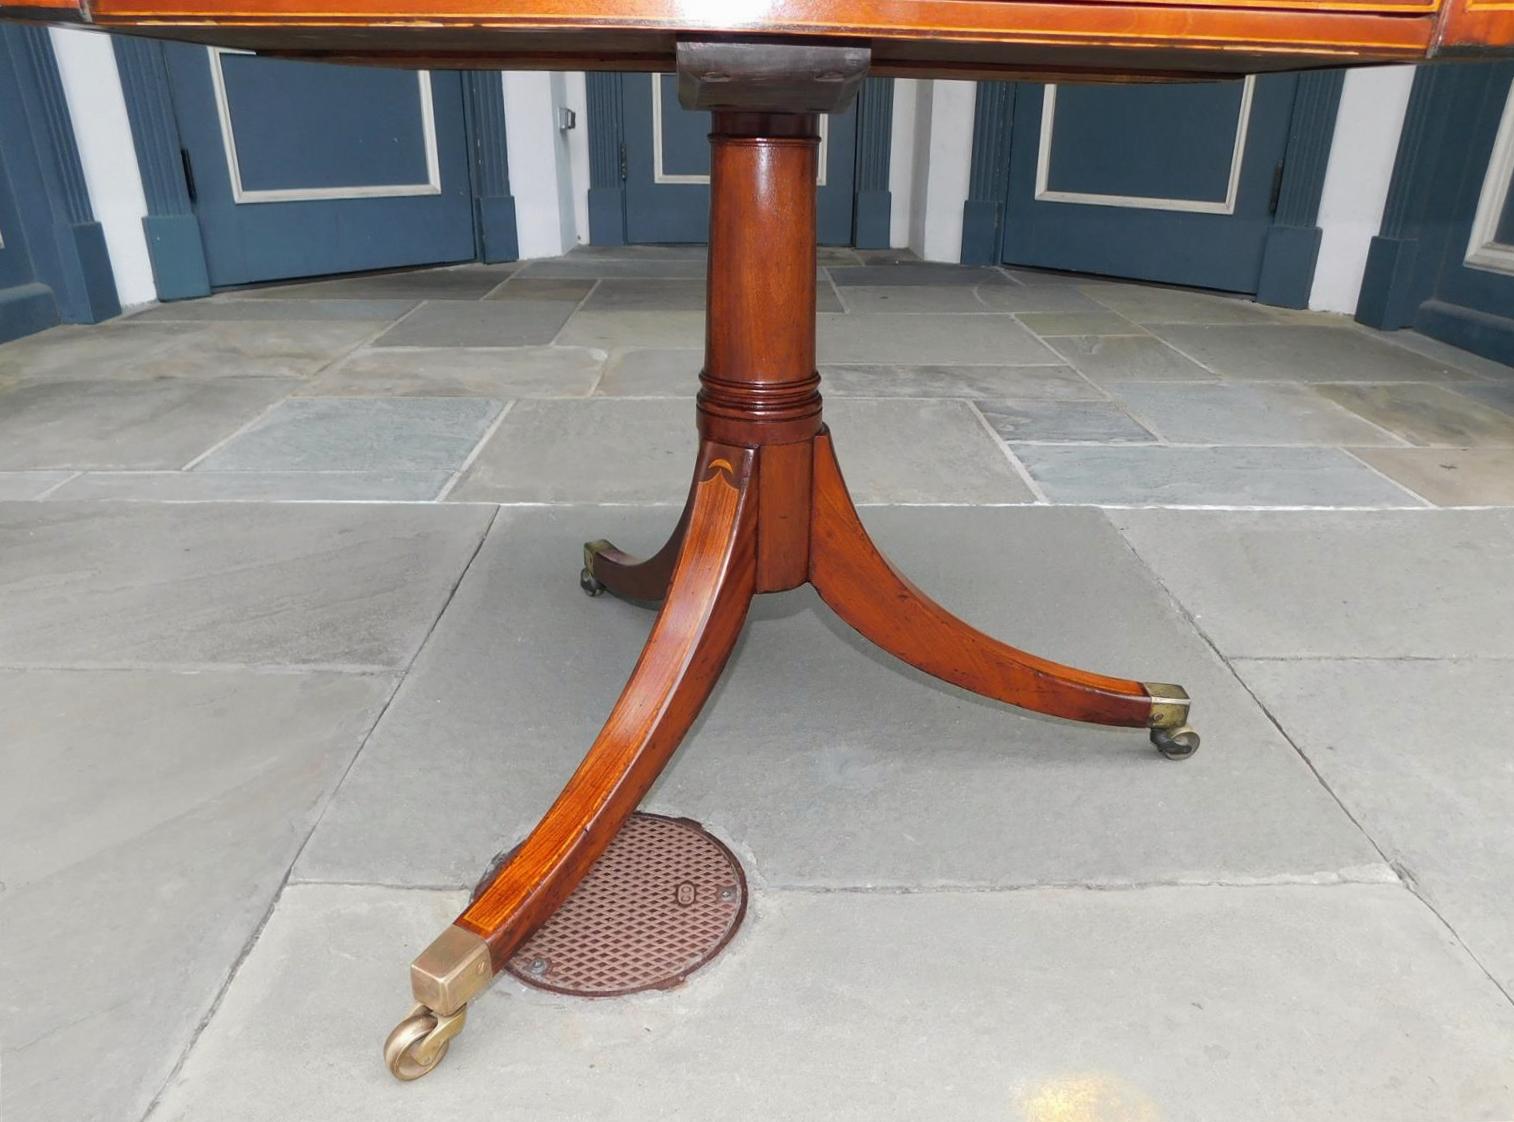 English Regency Mahogany Leather Reading Table with Flanking Candle Slides 1790 For Sale 10